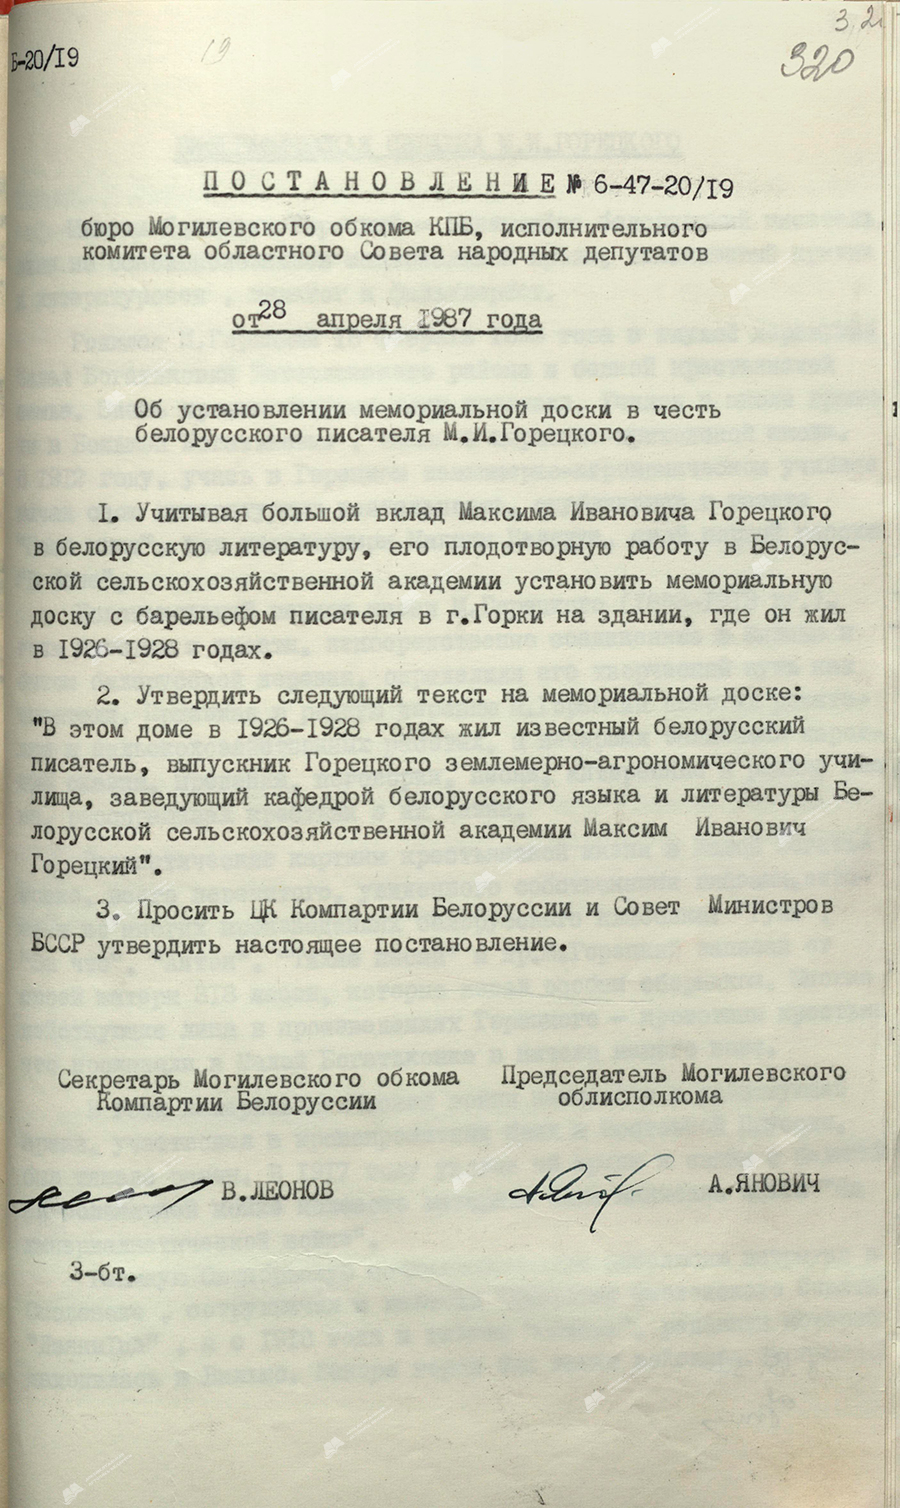 Resolution No. 6-47-20/19 of the Bureau of the Mogilev Regional Committee of the Communist Party of Belarus and the Executive Committee of the Mogilev Regional Council of People’s Deputies «On the establishment of a memorial plaque in honor of the Belarusian writer M.I.Goretsky»-с. 0